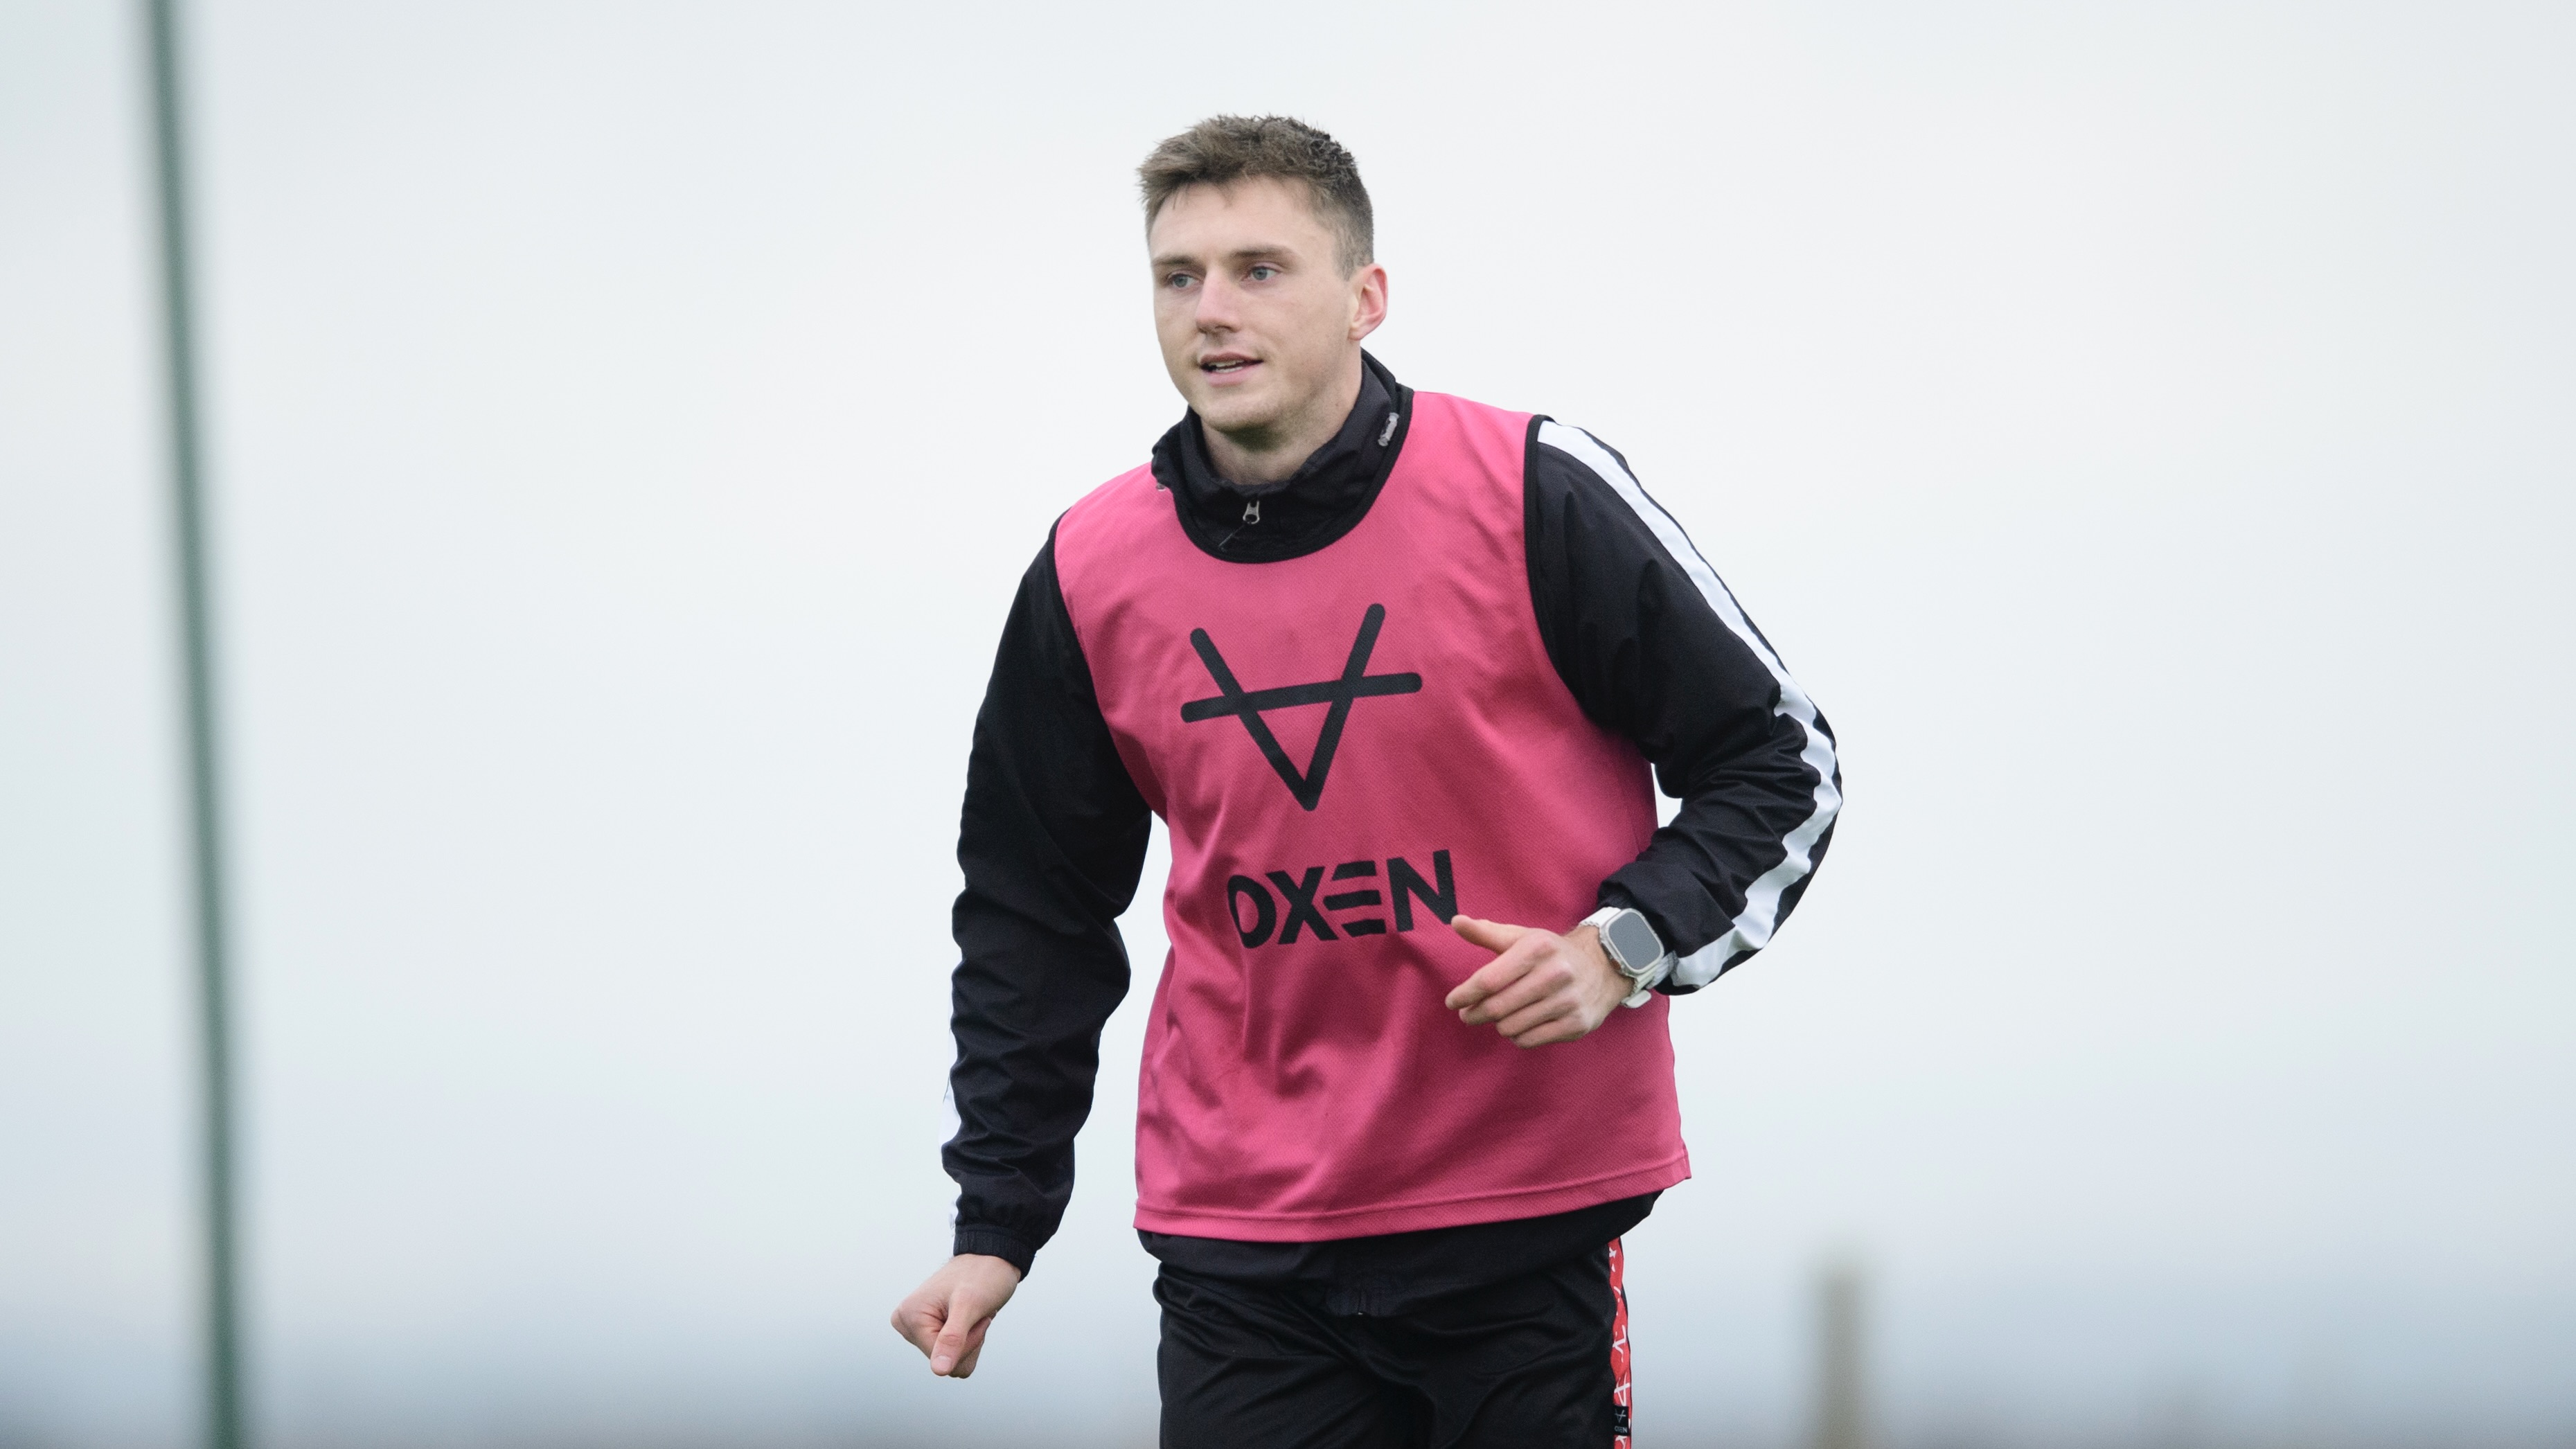 Hayden Cann during training. He is wearing a pink bib over a black jacket.